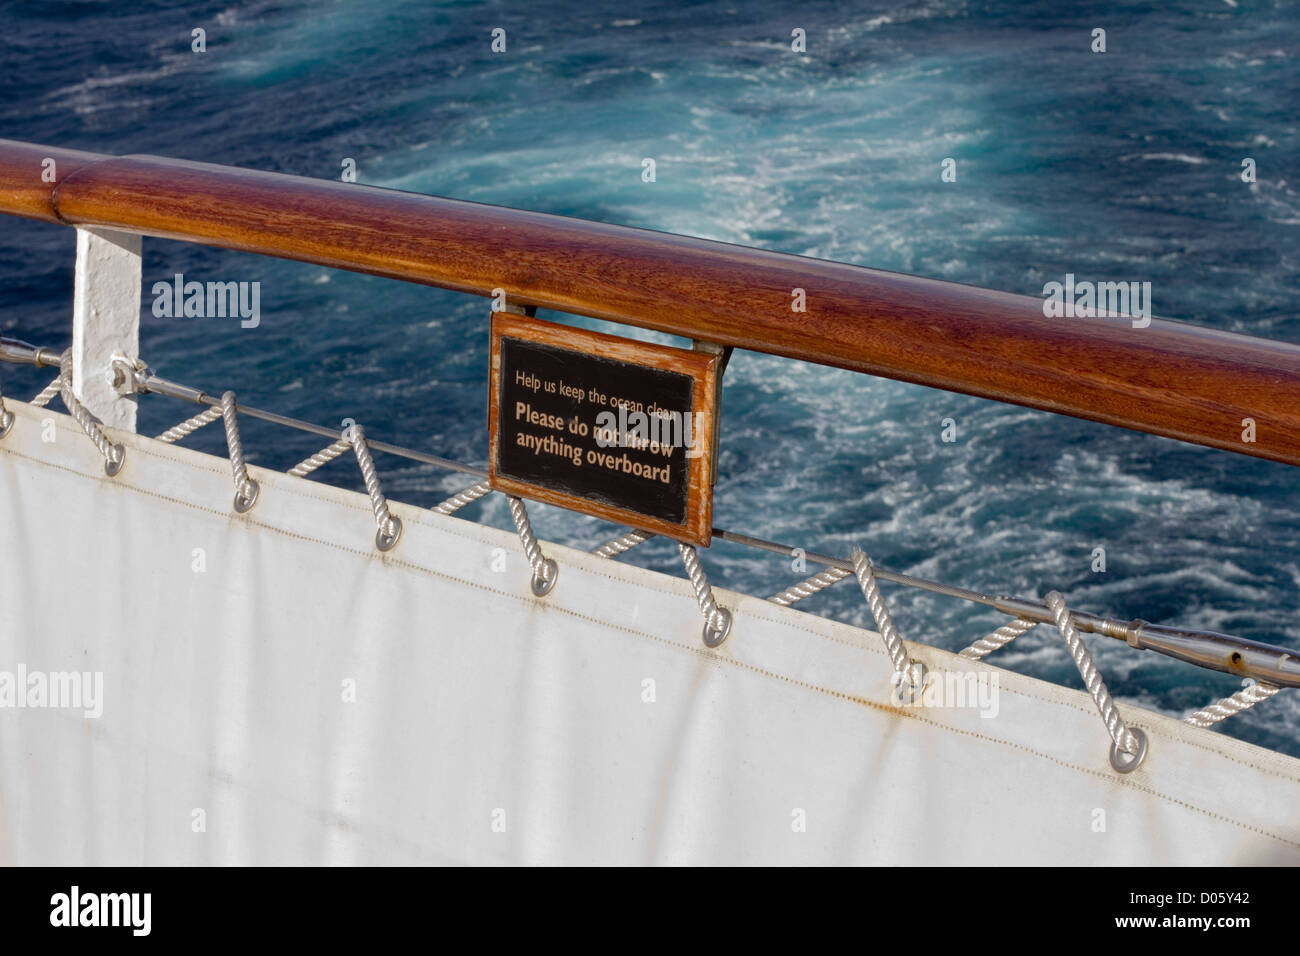 Notice at the stern of the Cunard cruise ship Queen Mary 2 advising not to pollute the sea by throwing anything overboard. Stock Photo